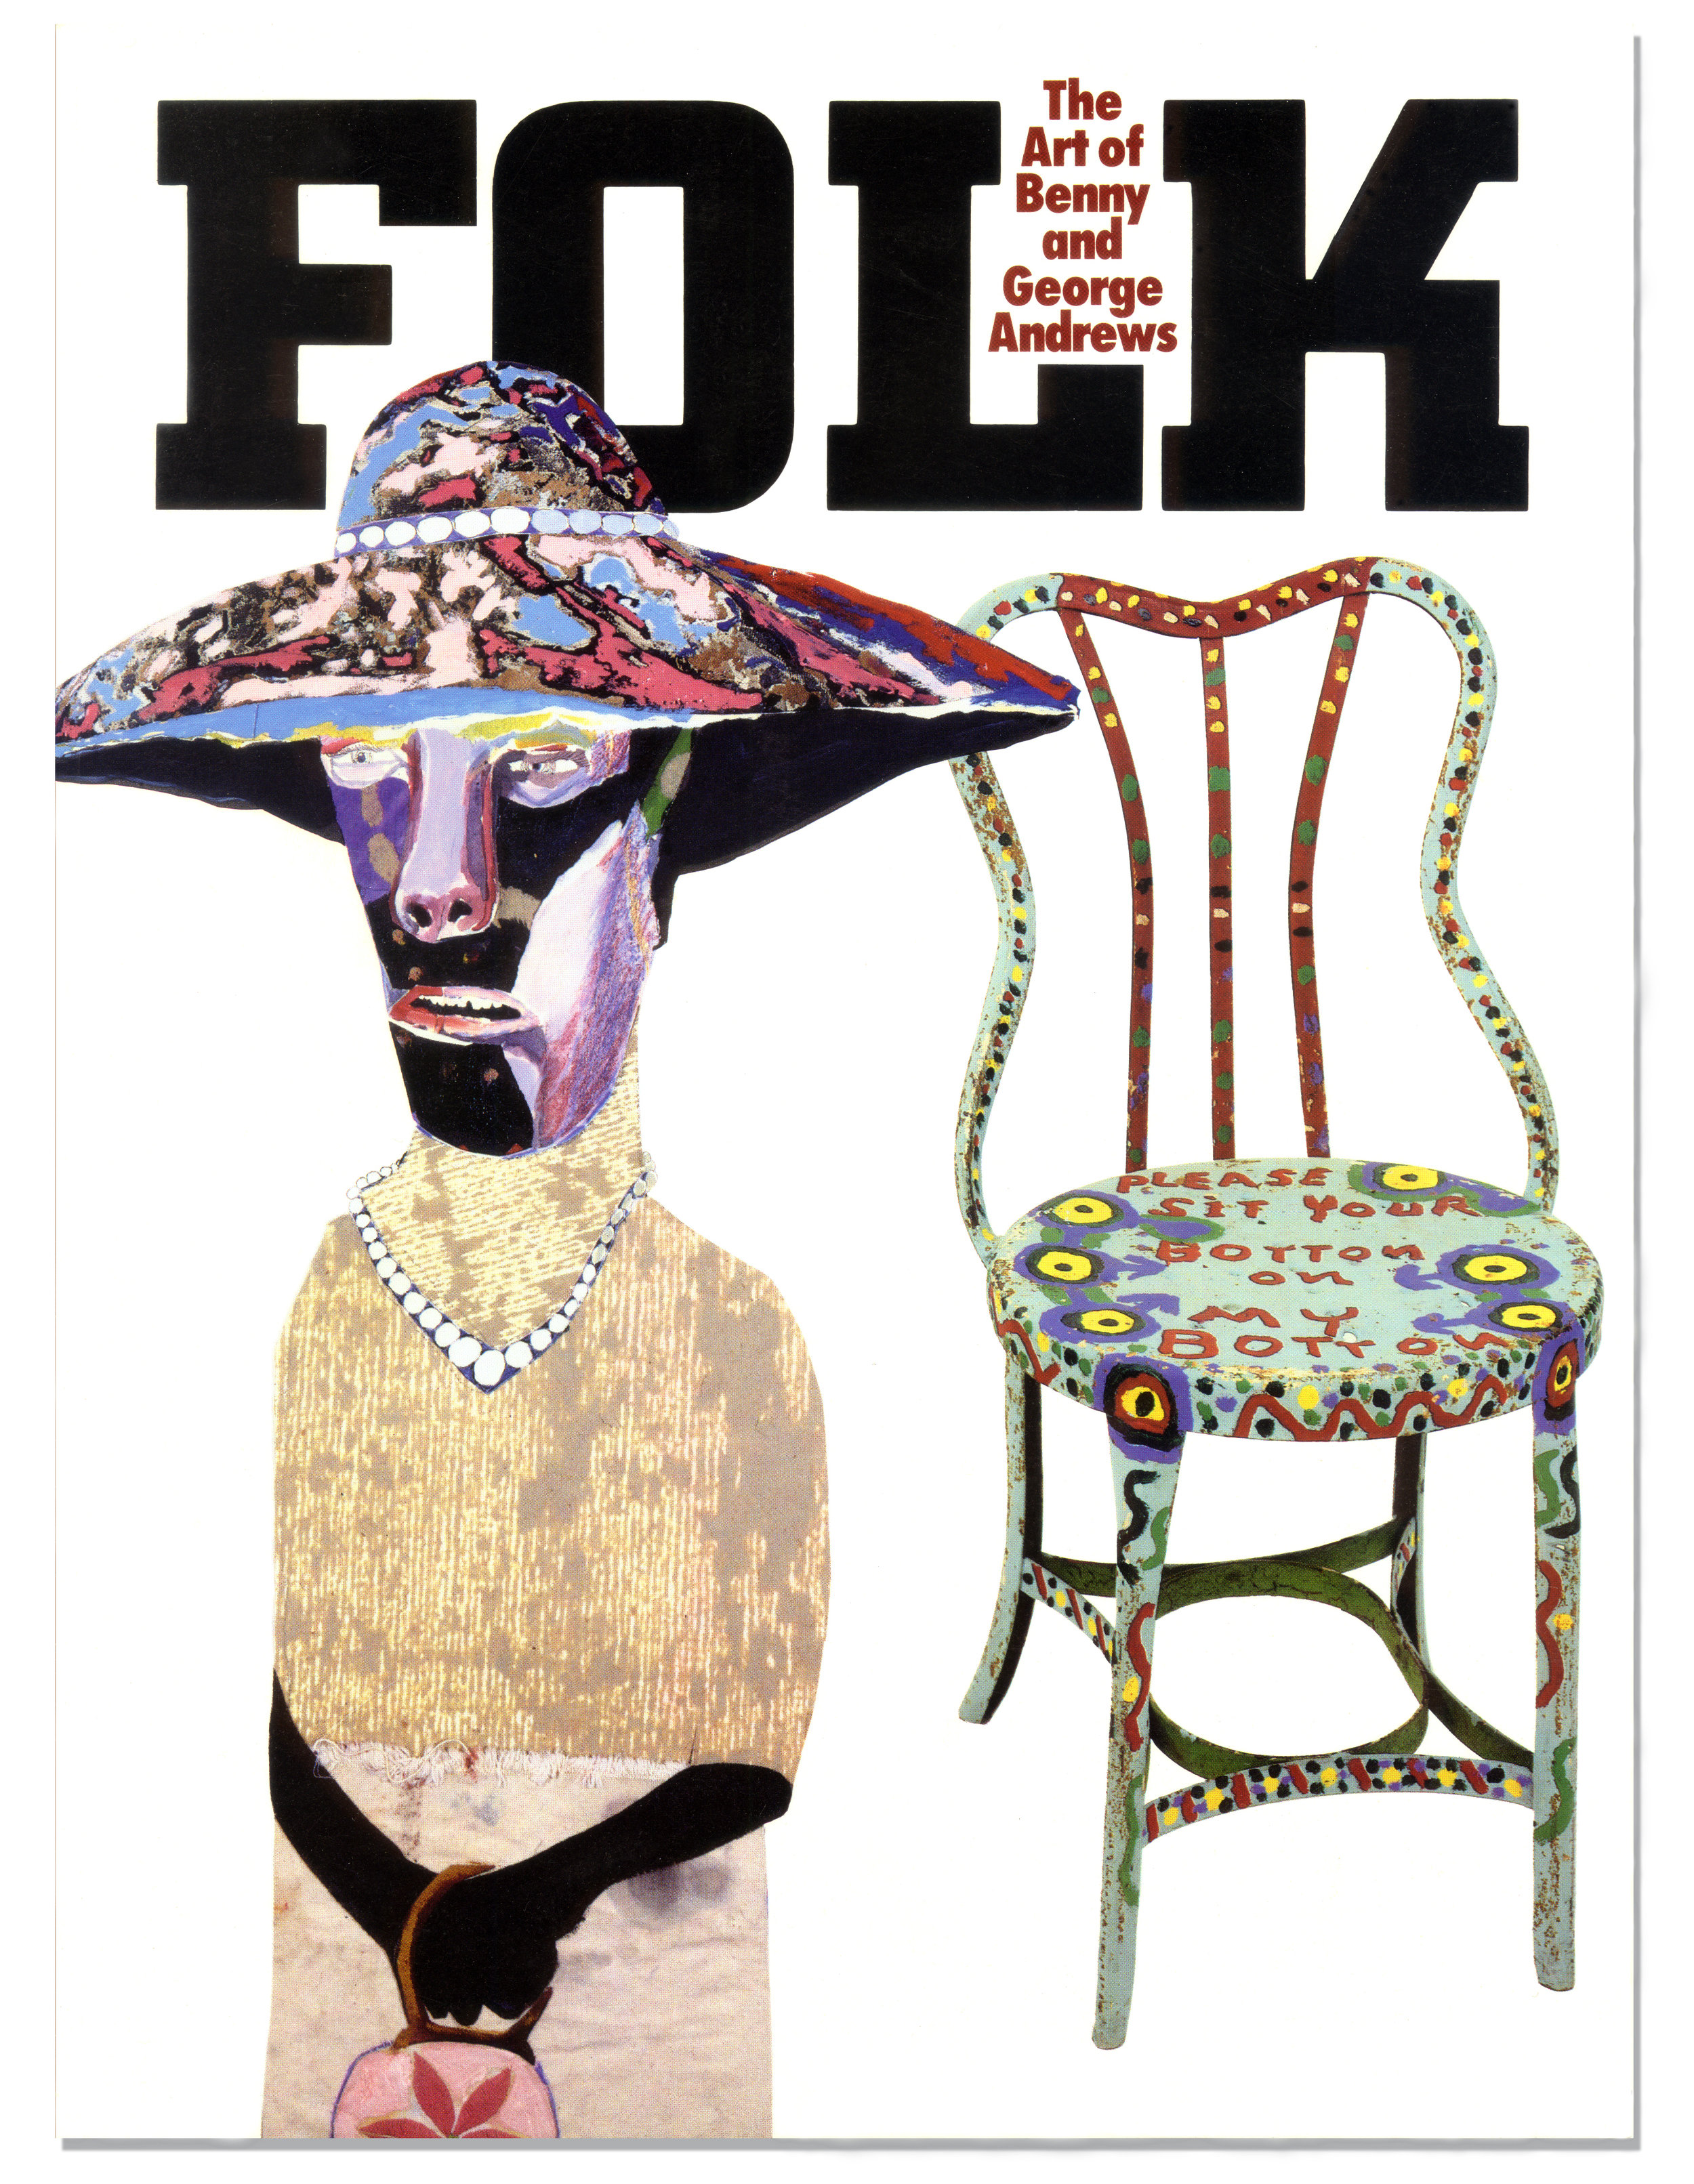  Brooks Museum of Art “FOLK The Art of Benny and George Andrews” exhibit catalog  Exhibition organized by Patty Bladon  Benny Andrews   Church Going Ikon , 1989, detail  George Andrews   Painted Chair , n.d.  Design and creative by Chuck Mitchell 